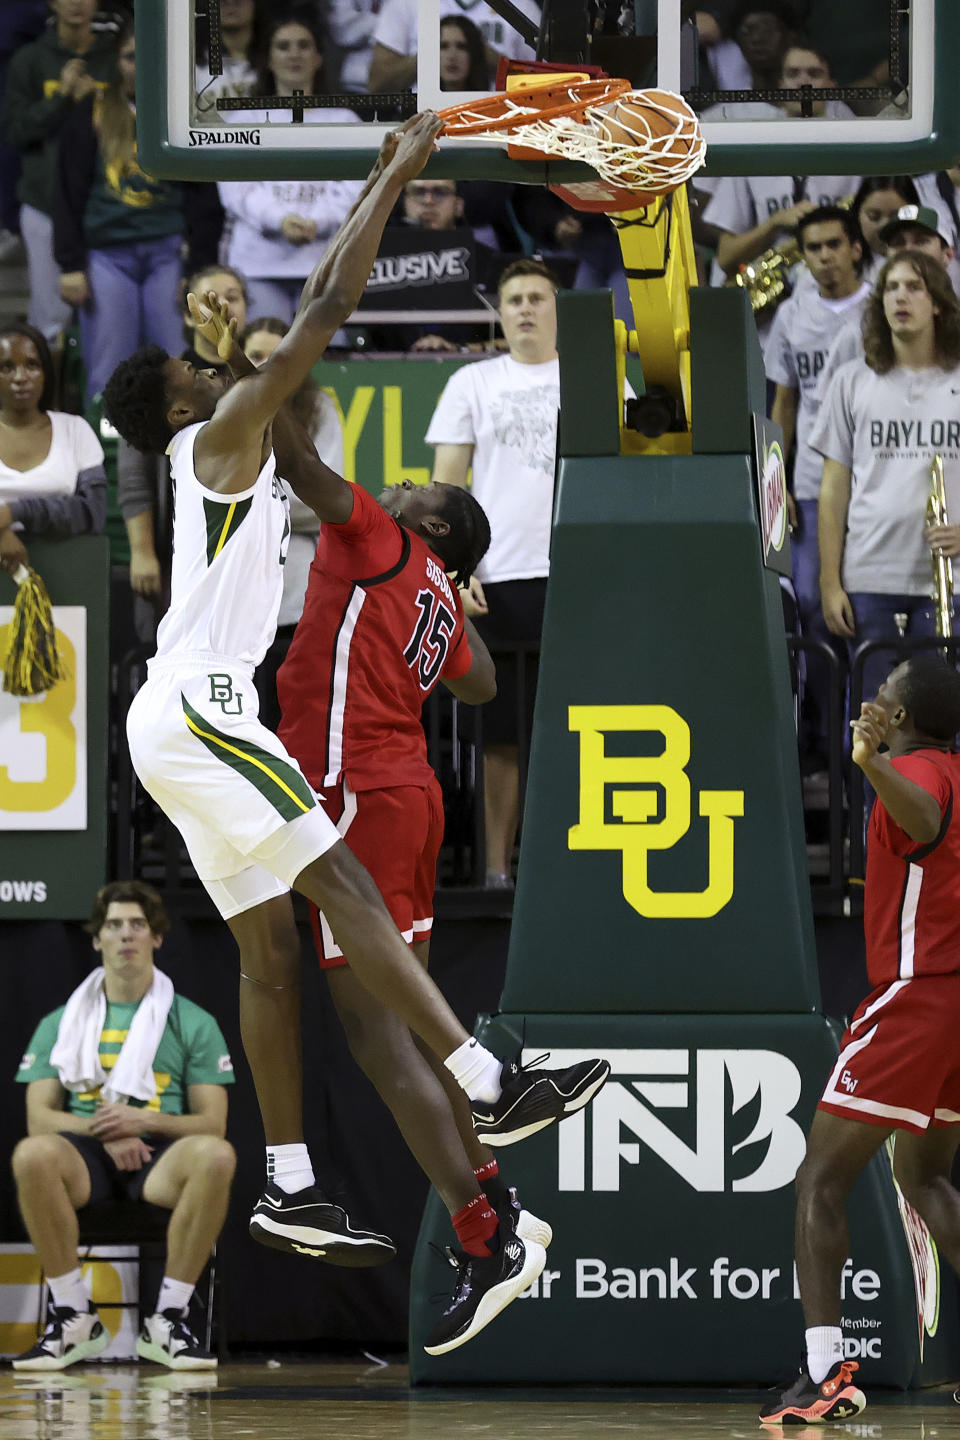 Baylor center Yves Missi, left, dunks past Gardner-Webb forward Cheickna Sissoko (15) in the first half of an NCAA college basketball game, Sunday, Nov. 12, 2023, in Waco, Texas. (AP Photo/Jerry Larson)